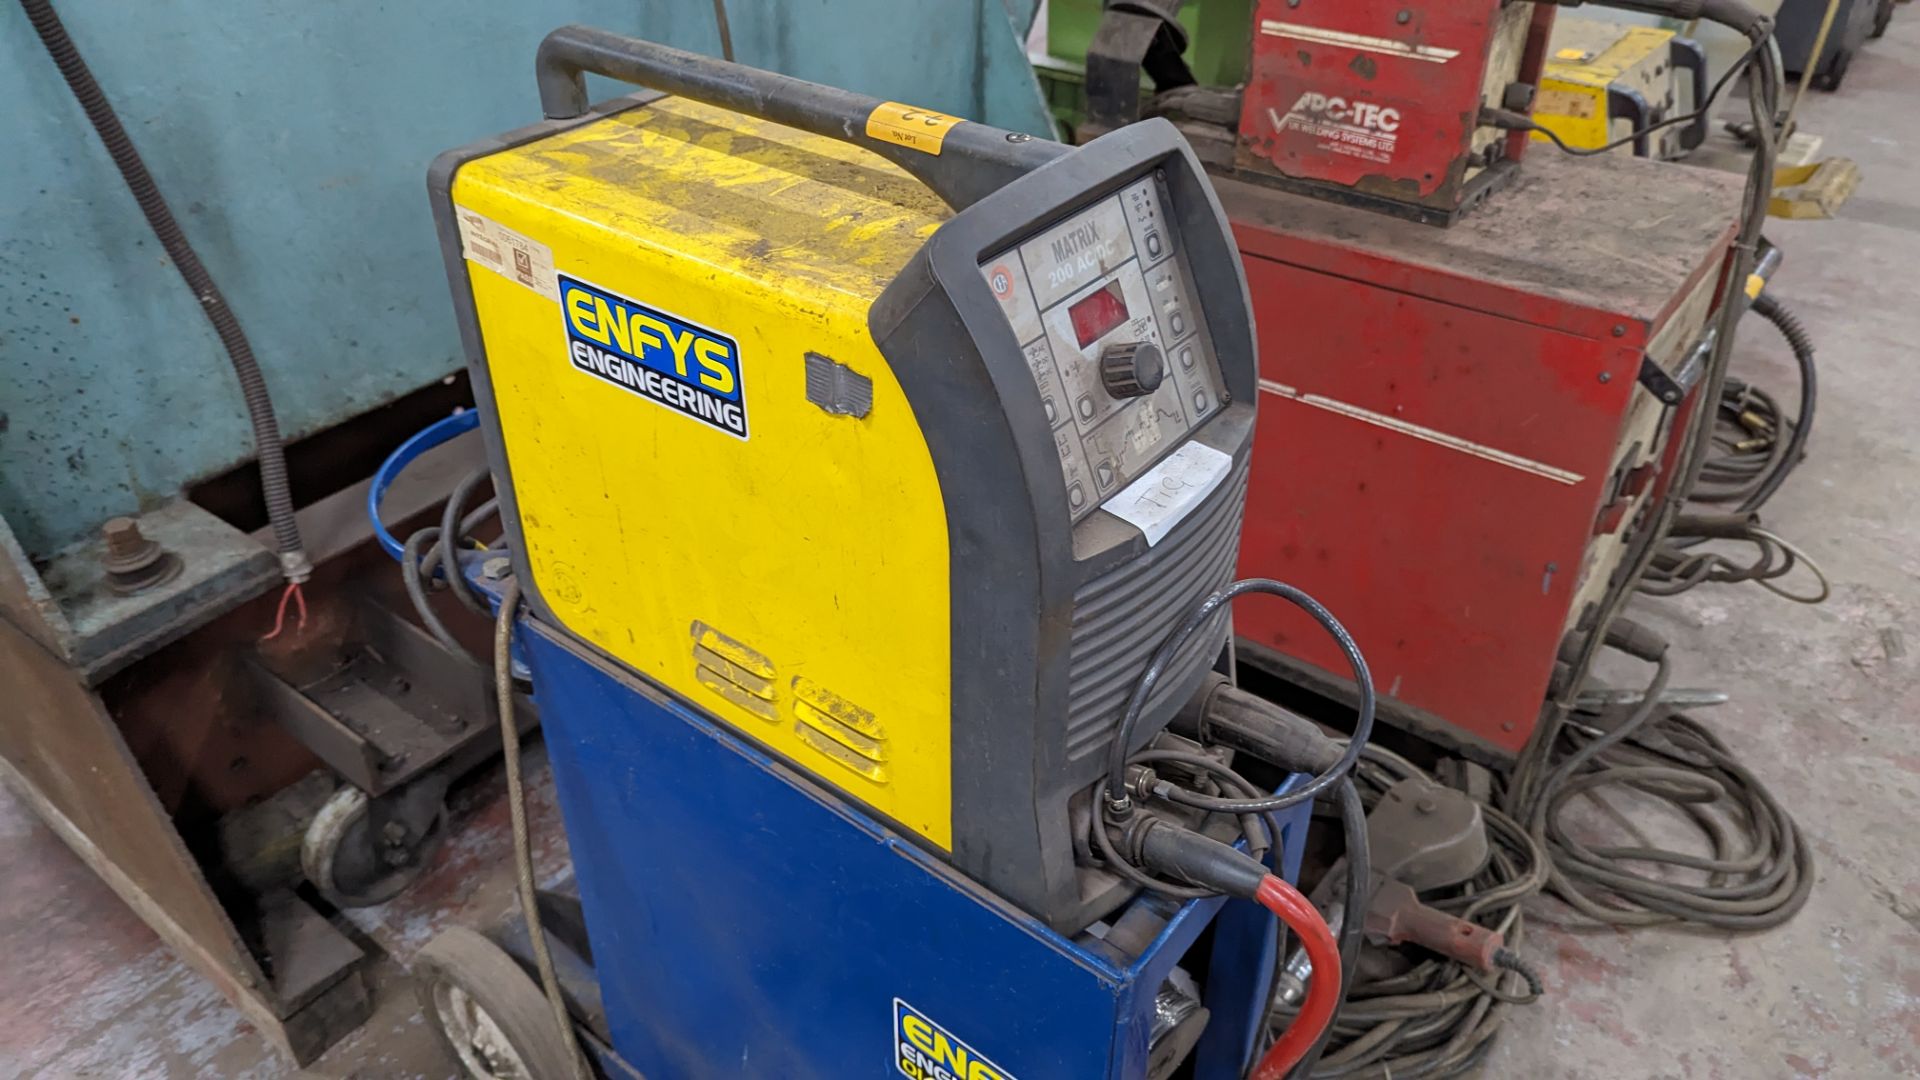 Matrix 200 AC/DC tig welding set on dedicated trolley with assorted ancillaries, as pictured - Image 6 of 13